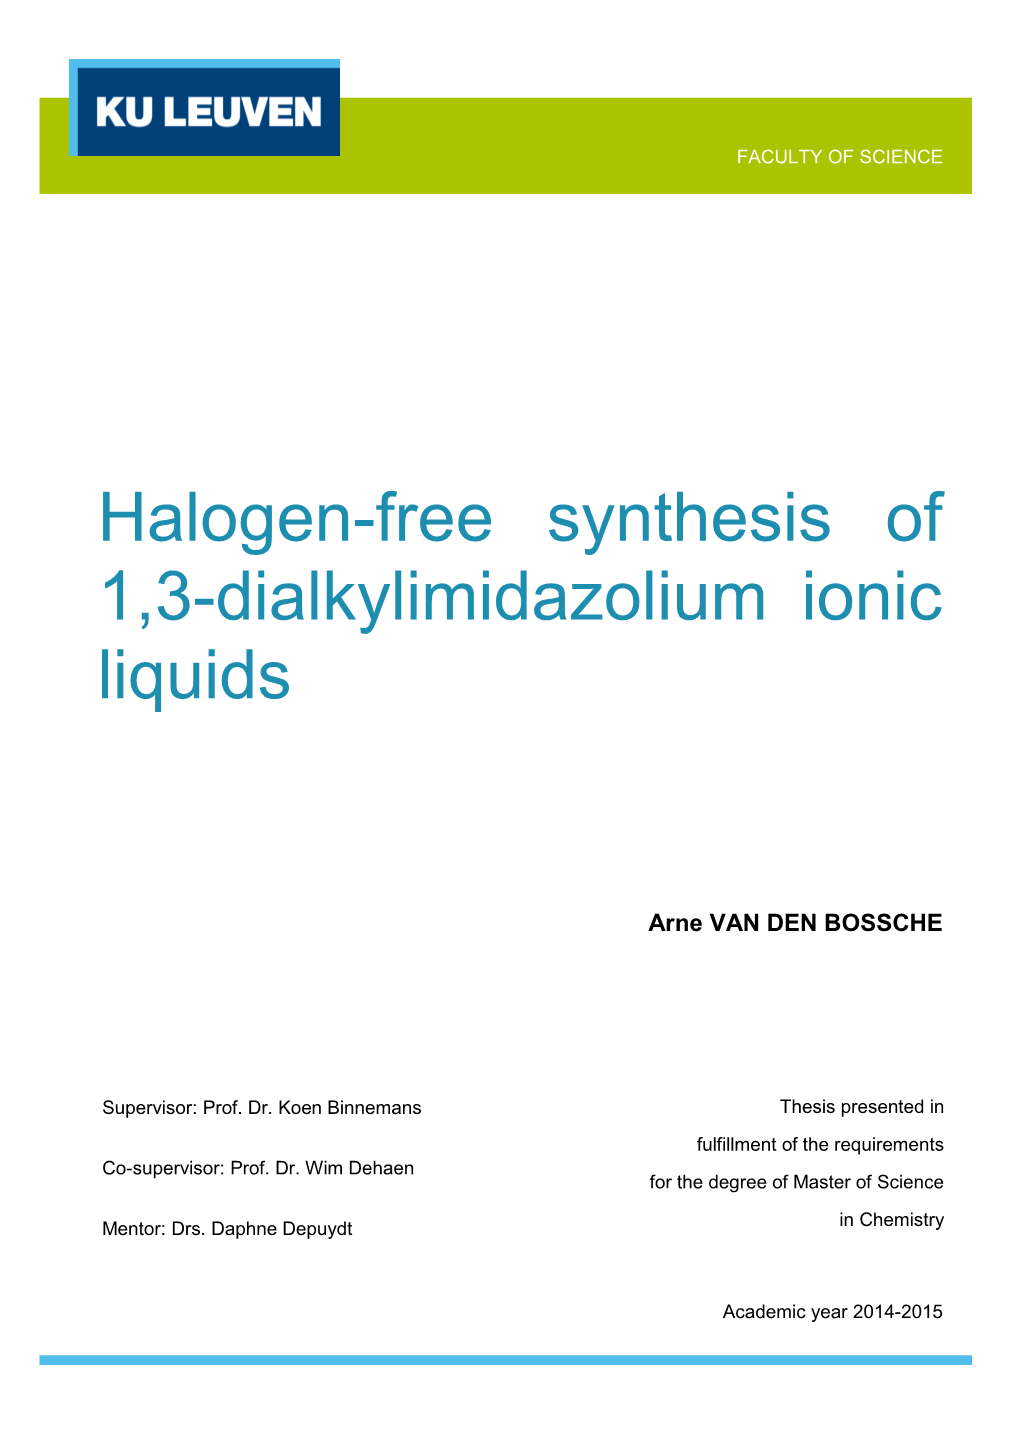 Halogen-Free Synthesis of 1,3-Dialkylimidazolium Ionic Liquids